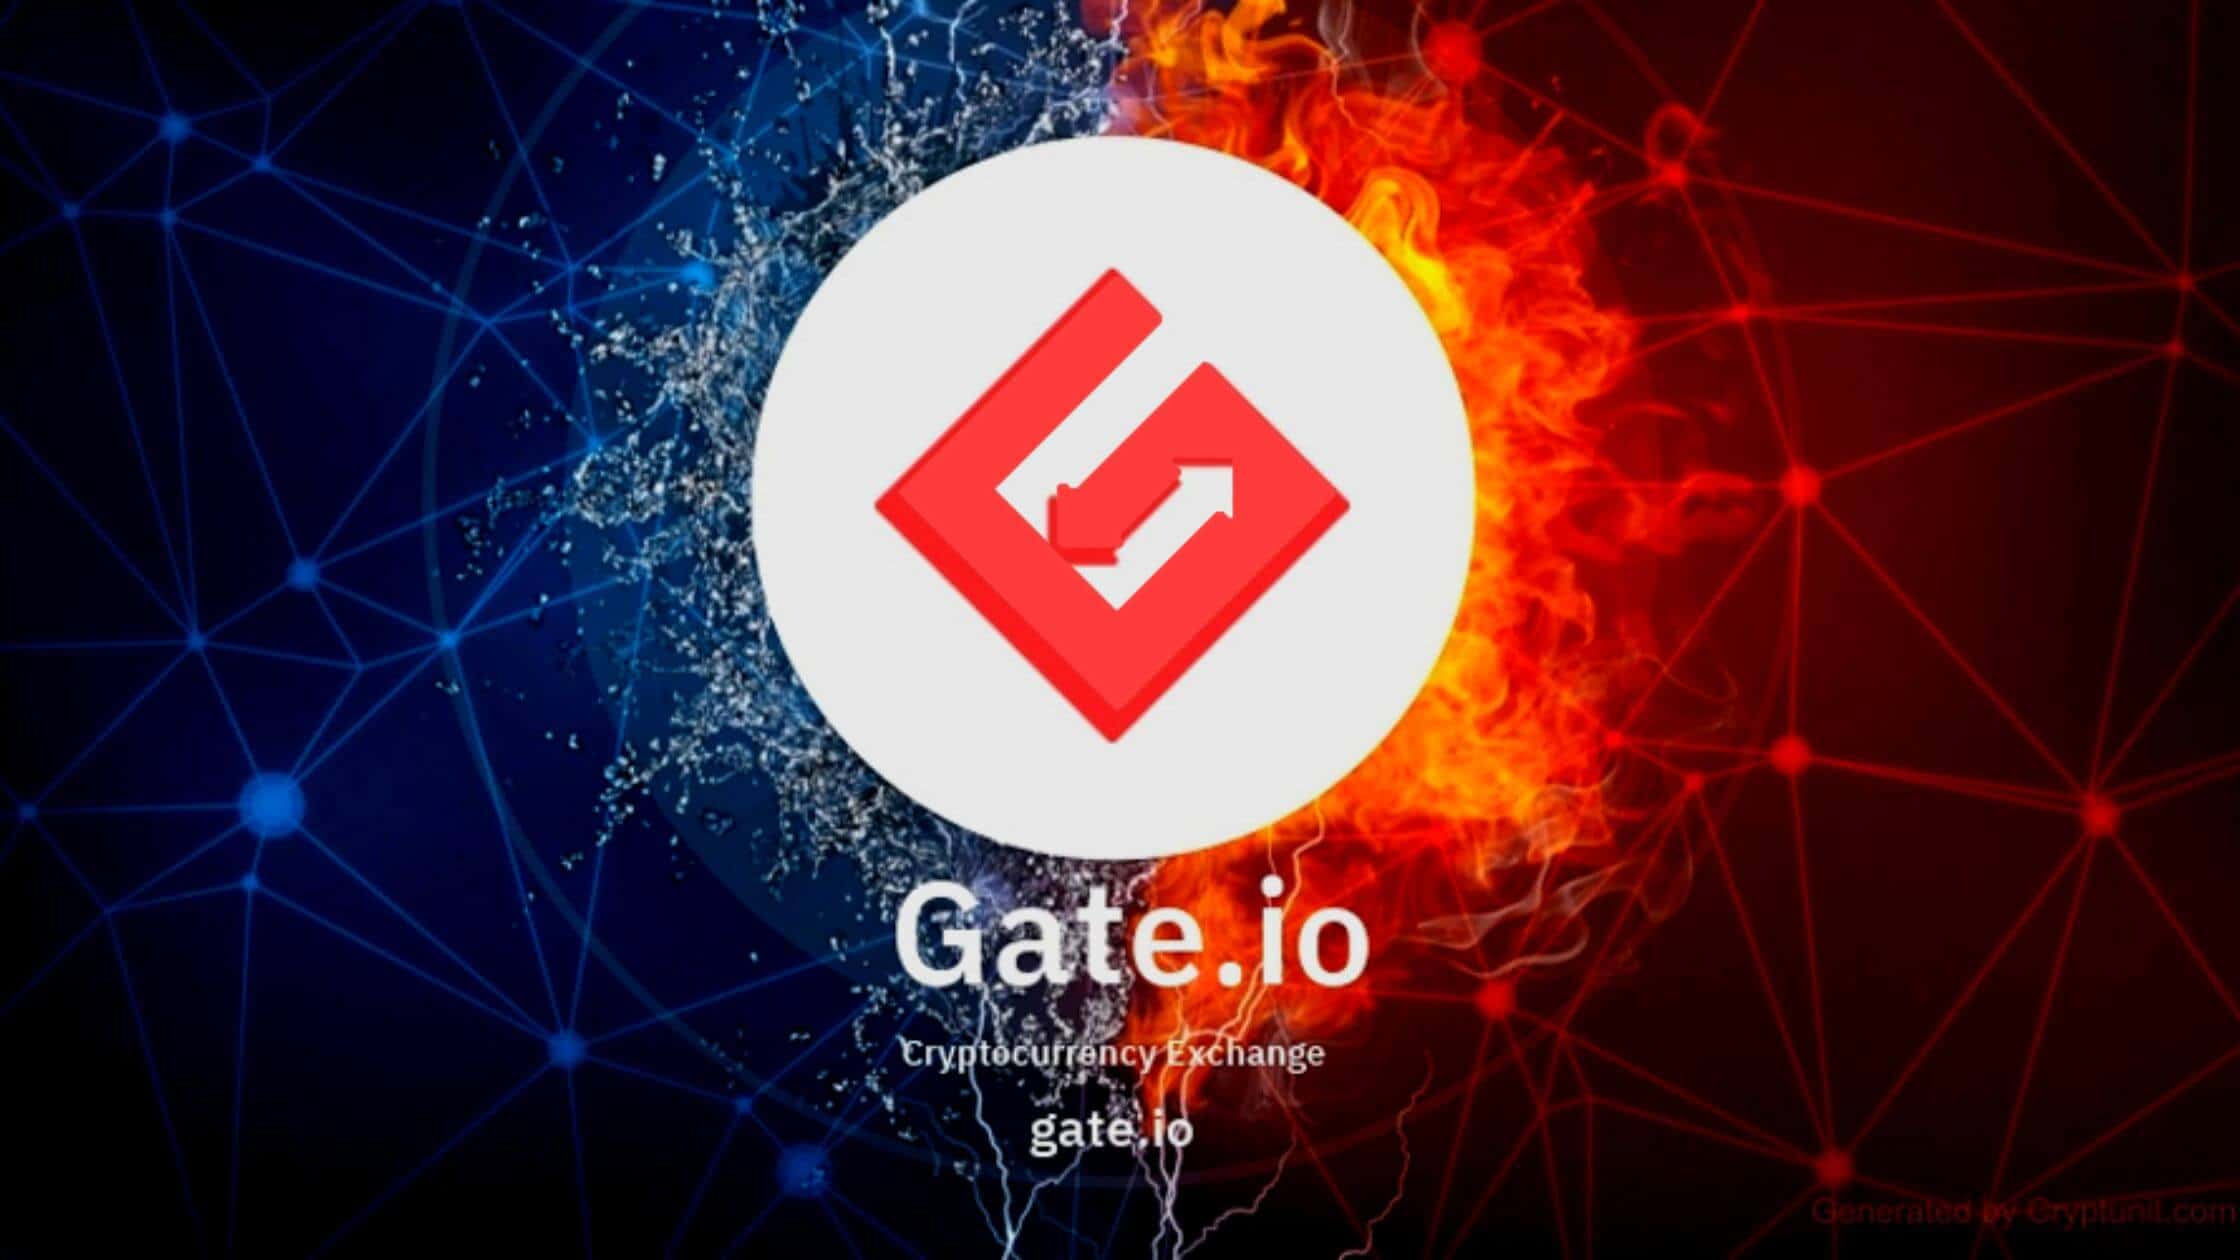 The Node Maintenance On Gate.io Causes A Delay In Deposits And Withdrawals